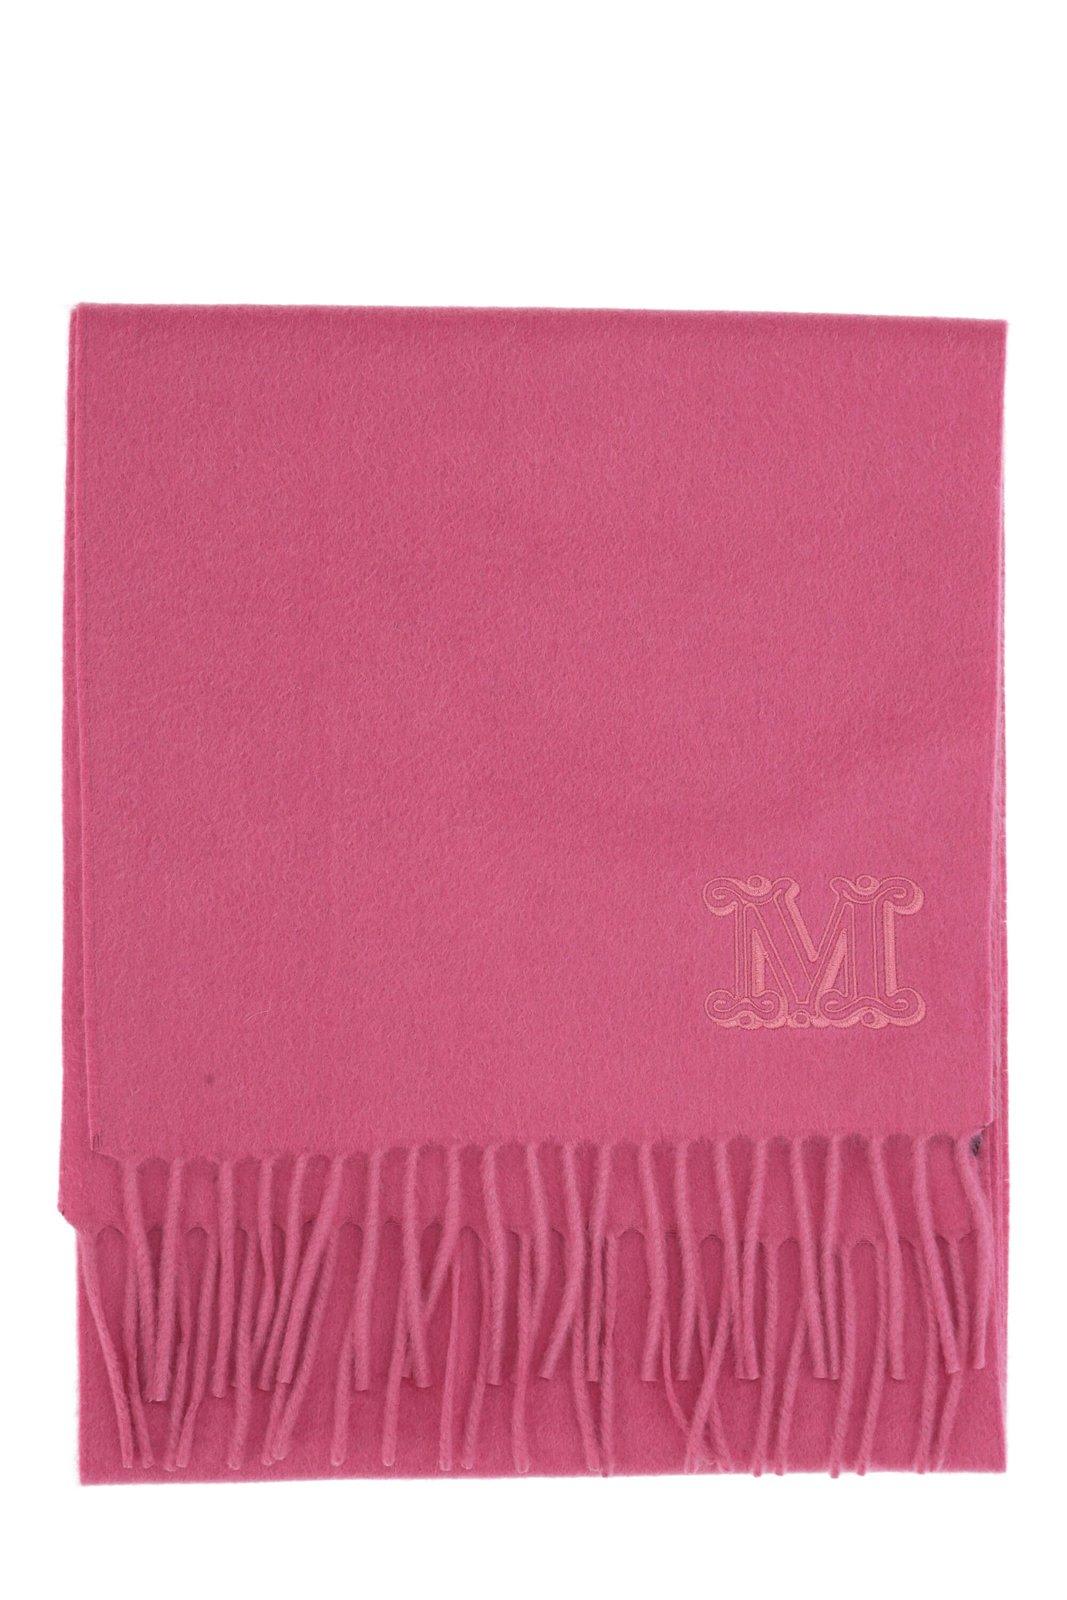 Max Mara Logo Embroidered Fringed Knitted Scarf